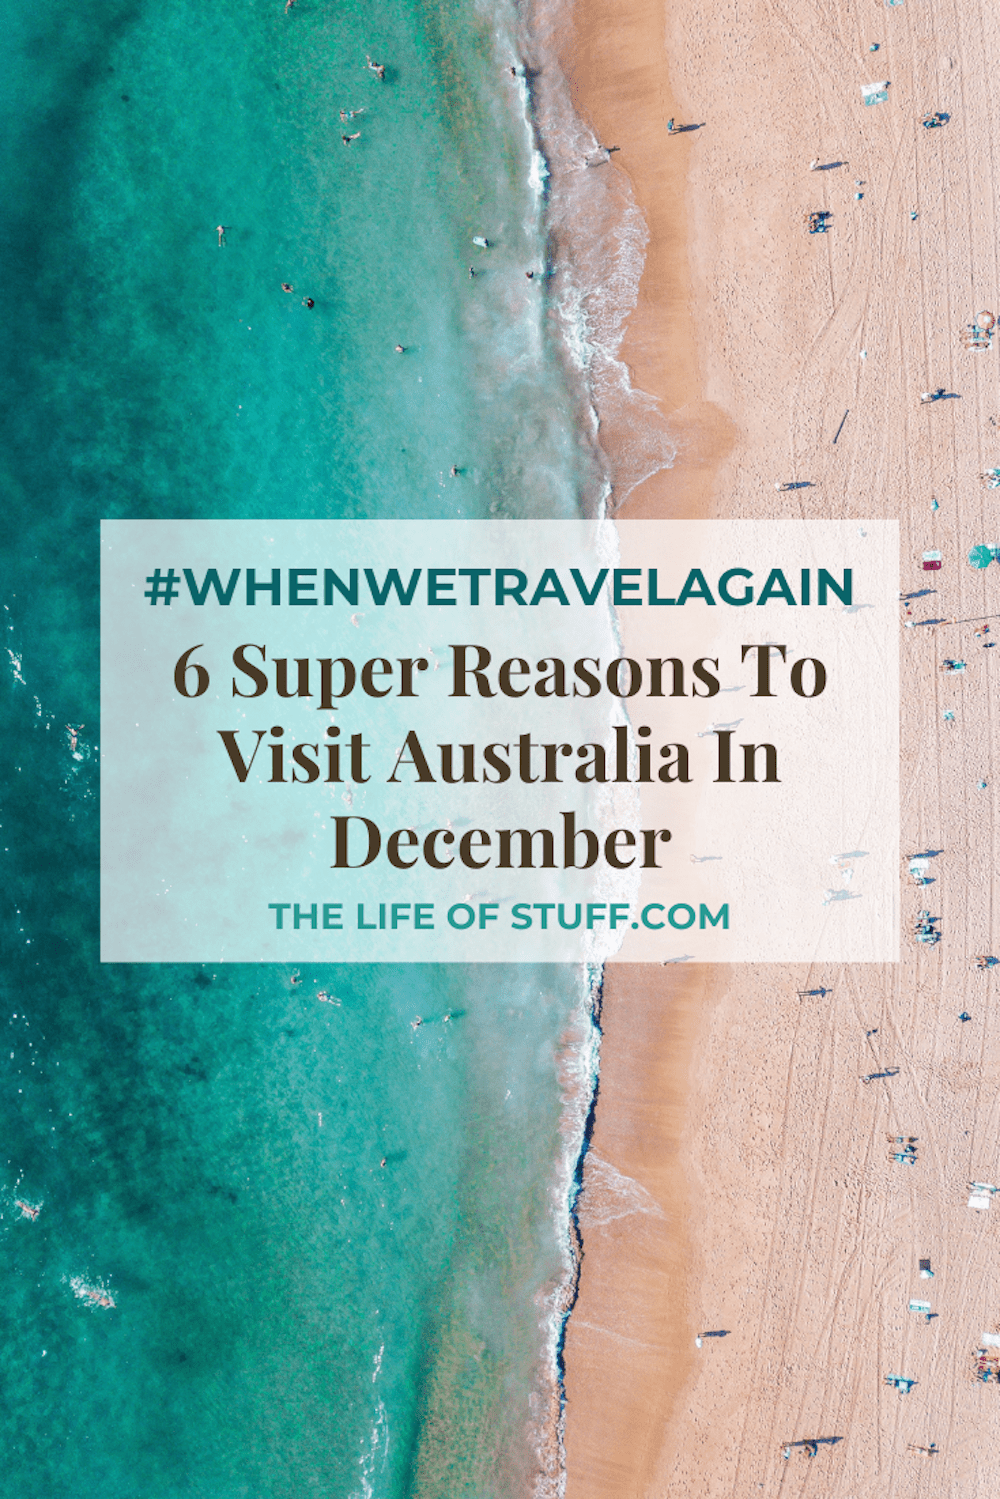 6 Super Reasons To Visit Australia In December #WhenWeTravelAgain - The Life of Stuff